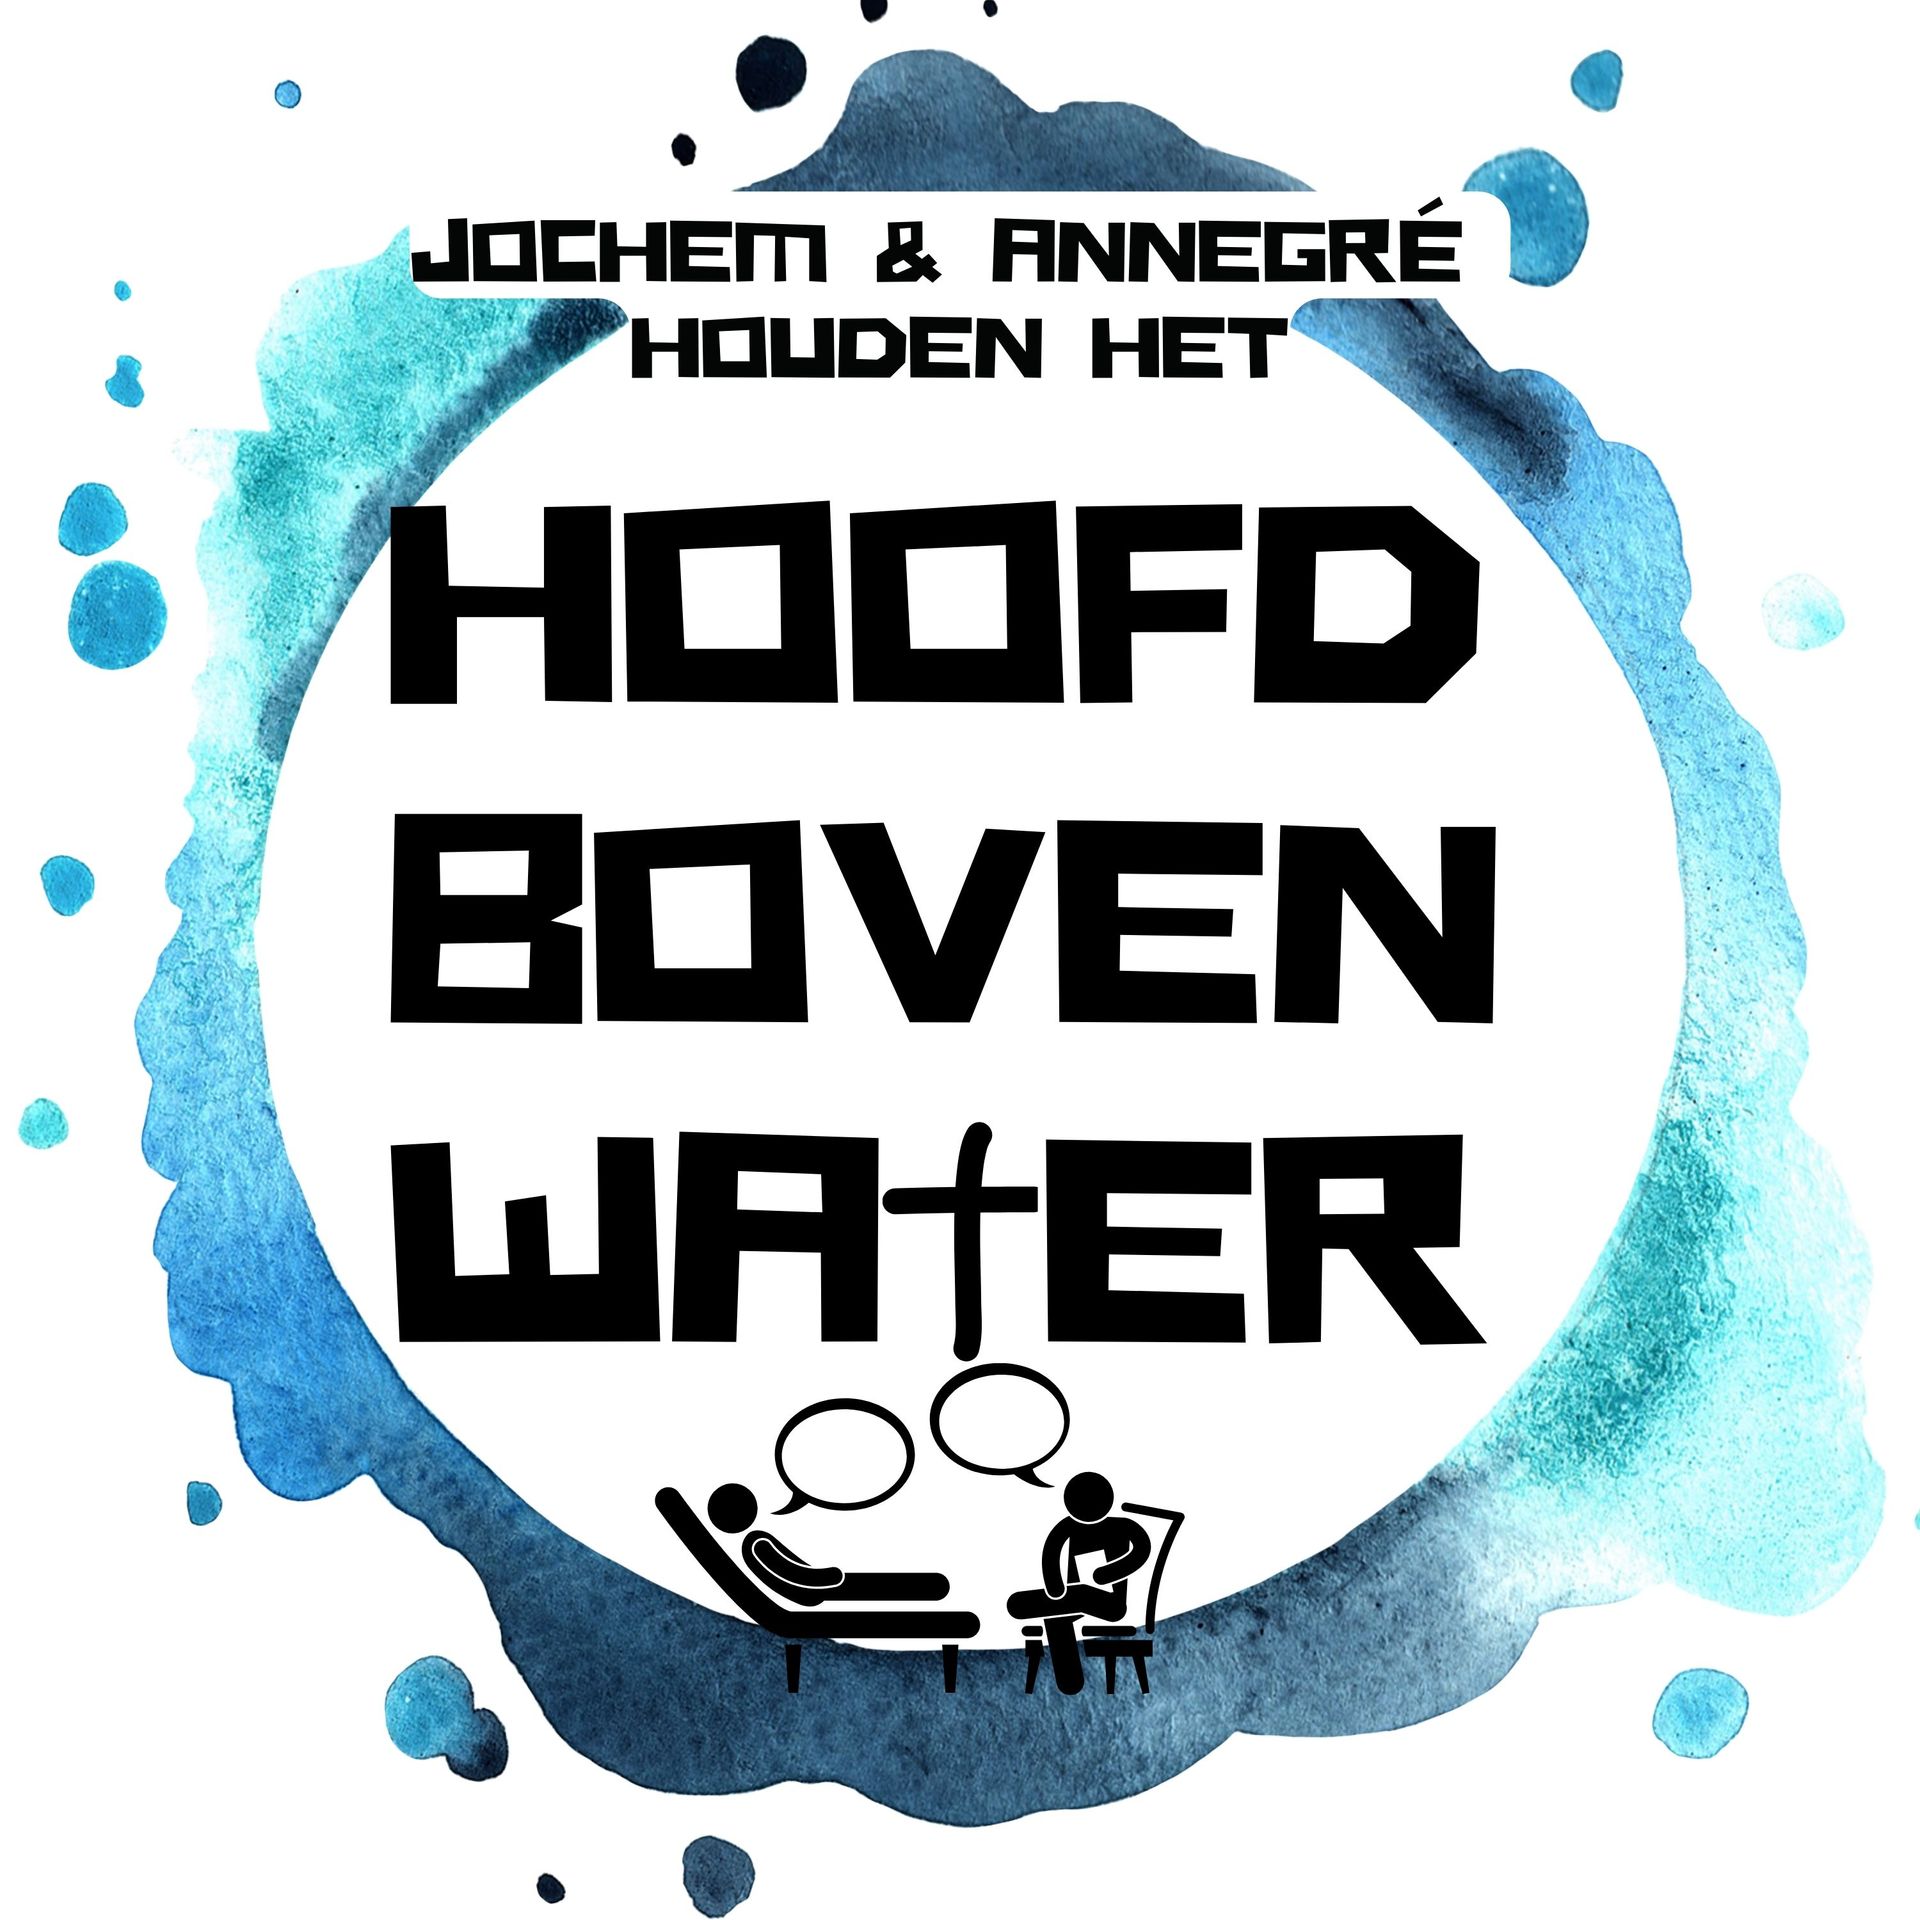 Podcast: Hoofd boven water